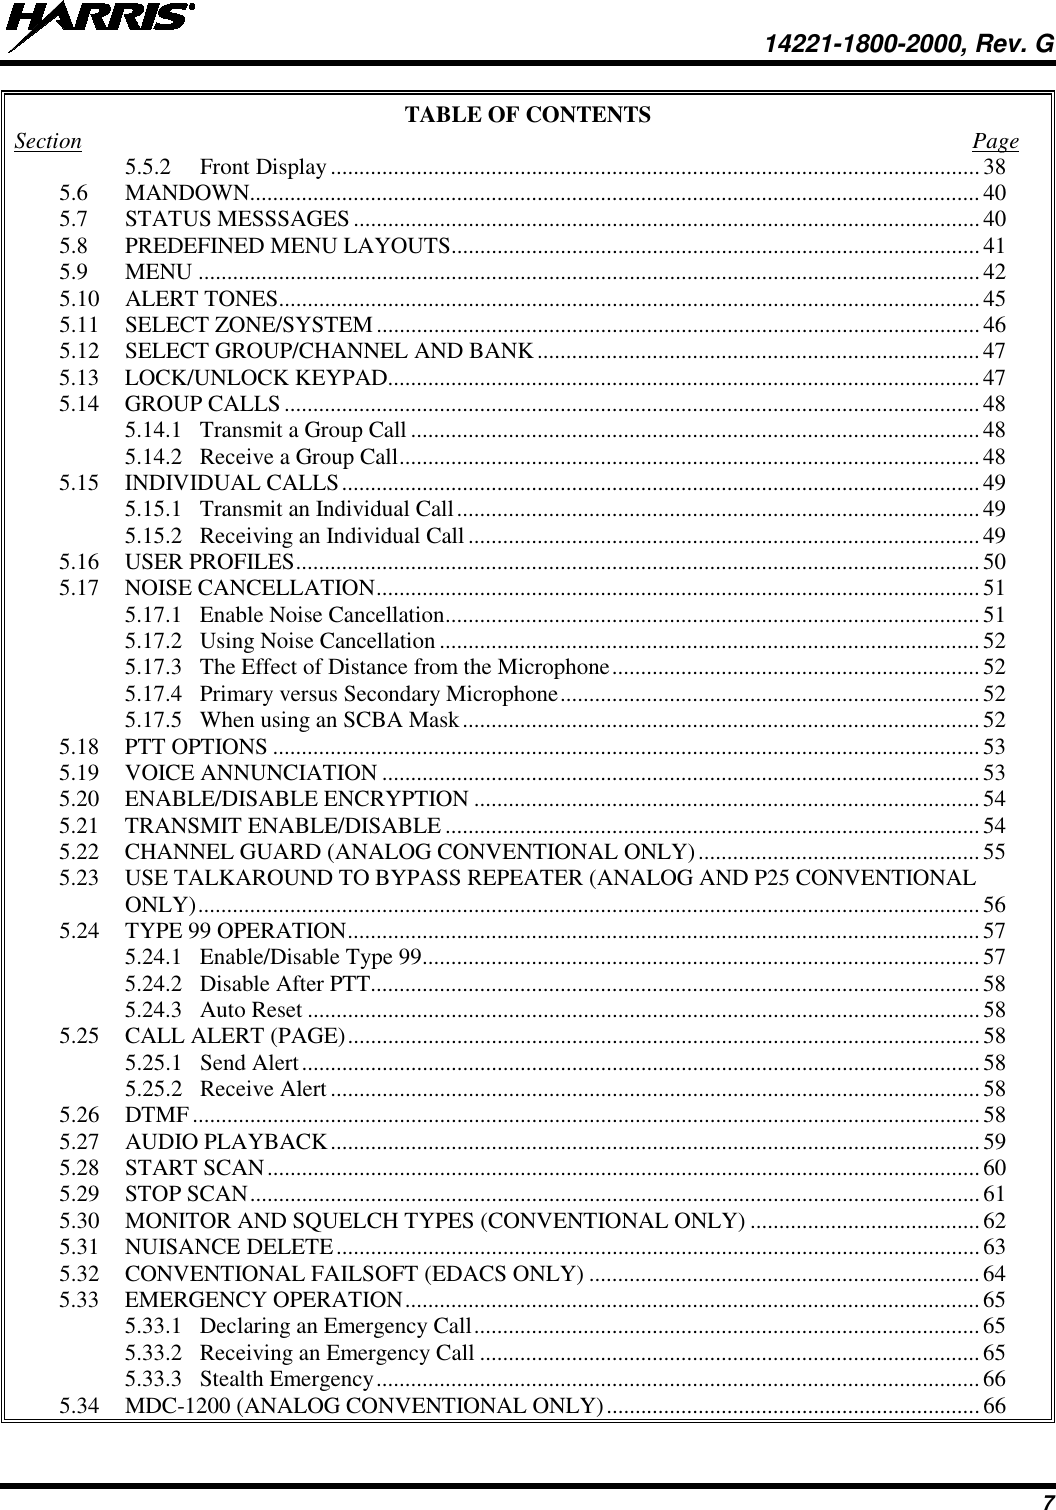  14221-1800-2000, Rev. G 7 TABLE OF CONTENTS Section  Page 5.5.2 Front Display ................................................................................................................. 38 5.6 MANDOWN............................................................................................................................... 40 5.7 STATUS MESSSAGES ............................................................................................................. 40 5.8 PREDEFINED MENU LAYOUTS............................................................................................ 41 5.9 MENU ........................................................................................................................................ 42 5.10 ALERT TONES.......................................................................................................................... 45 5.11 SELECT ZONE/SYSTEM ......................................................................................................... 46 5.12 SELECT GROUP/CHANNEL AND BANK ............................................................................. 47 5.13 LOCK/UNLOCK KEYPAD....................................................................................................... 47 5.14 GROUP CALLS ......................................................................................................................... 48 5.14.1 Transmit a Group Call ................................................................................................... 48 5.14.2 Receive a Group Call ..................................................................................................... 48 5.15 INDIVIDUAL CALLS ............................................................................................................... 49 5.15.1 Transmit an Individual Call ........................................................................................... 49 5.15.2 Receiving an Individual Call ......................................................................................... 49 5.16 USER PROFILES ....................................................................................................................... 50 5.17 NOISE CANCELLATION ......................................................................................................... 51 5.17.1 Enable Noise Cancellation ............................................................................................. 51 5.17.2 Using Noise Cancellation .............................................................................................. 52 5.17.3 The Effect of Distance from the Microphone ................................................................ 52 5.17.4 Primary versus Secondary Microphone ......................................................................... 52 5.17.5 When using an SCBA Mask .......................................................................................... 52 5.18 PTT OPTIONS ........................................................................................................................... 53 5.19 VOICE ANNUNCIATION ........................................................................................................ 53 5.20 ENABLE/DISABLE ENCRYPTION ........................................................................................ 54 5.21 TRANSMIT ENABLE/DISABLE ............................................................................................. 54 5.22 CHANNEL GUARD (ANALOG CONVENTIONAL ONLY) ................................................. 55 5.23 USE TALKAROUND TO BYPASS REPEATER (ANALOG AND P25 CONVENTIONAL ONLY) ........................................................................................................................................ 56 5.24 TYPE 99 OPERATION .............................................................................................................. 57 5.24.1 Enable/Disable Type 99 ................................................................................................. 57 5.24.2 Disable After PTT.......................................................................................................... 58 5.24.3 Auto Reset ..................................................................................................................... 58 5.25 CALL ALERT (PAGE) .............................................................................................................. 58 5.25.1 Send Alert ...................................................................................................................... 58 5.25.2 Receive Alert ................................................................................................................. 58 5.26 DTMF ......................................................................................................................................... 58 5.27 AUDIO PLAYBACK ................................................................................................................. 59 5.28 START SCAN ............................................................................................................................ 60 5.29 STOP SCAN ............................................................................................................................... 61 5.30 MONITOR AND SQUELCH TYPES (CONVENTIONAL ONLY) ........................................ 62 5.31 NUISANCE DELETE ................................................................................................................ 63 5.32 CONVENTIONAL FAILSOFT (EDACS ONLY) .................................................................... 64 5.33 EMERGENCY OPERATION .................................................................................................... 65 5.33.1 Declaring an Emergency Call ........................................................................................ 65 5.33.2 Receiving an Emergency Call ....................................................................................... 65 5.33.3 Stealth Emergency ......................................................................................................... 66 5.34 MDC-1200 (ANALOG CONVENTIONAL ONLY) ................................................................. 66 